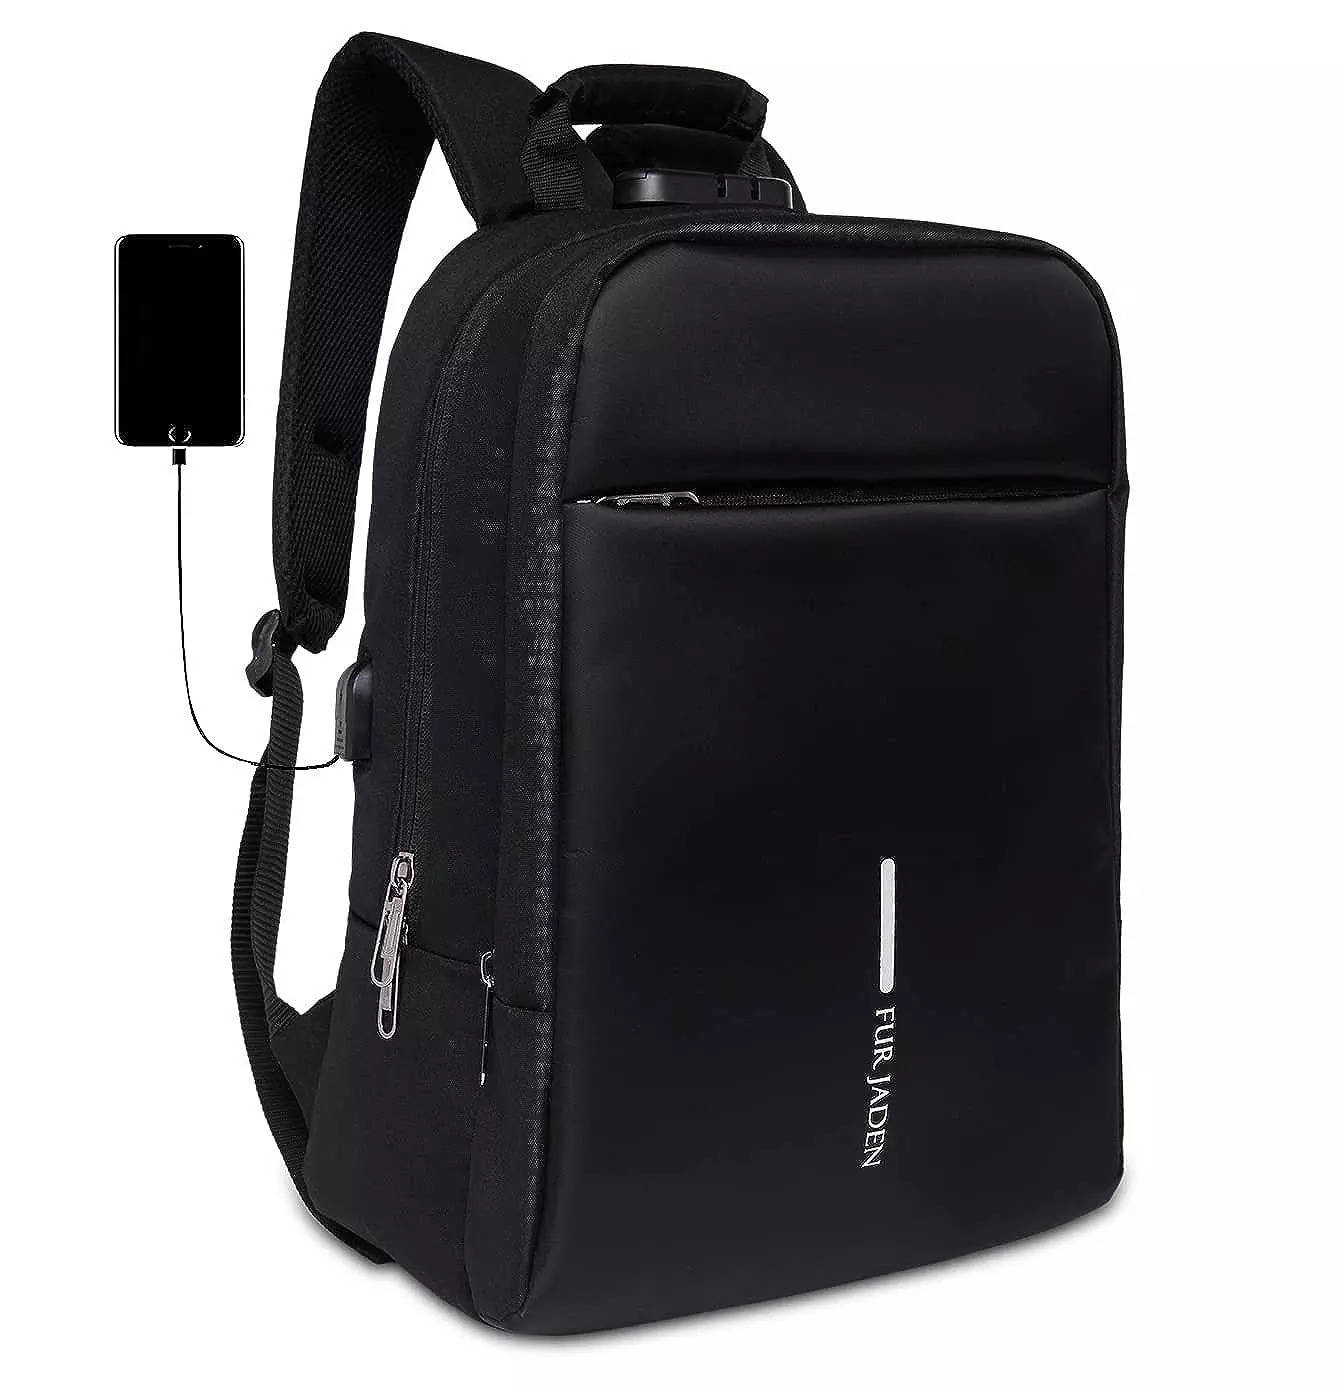 Mobile Edge Professional Checkpoint Friendly Backpack 16